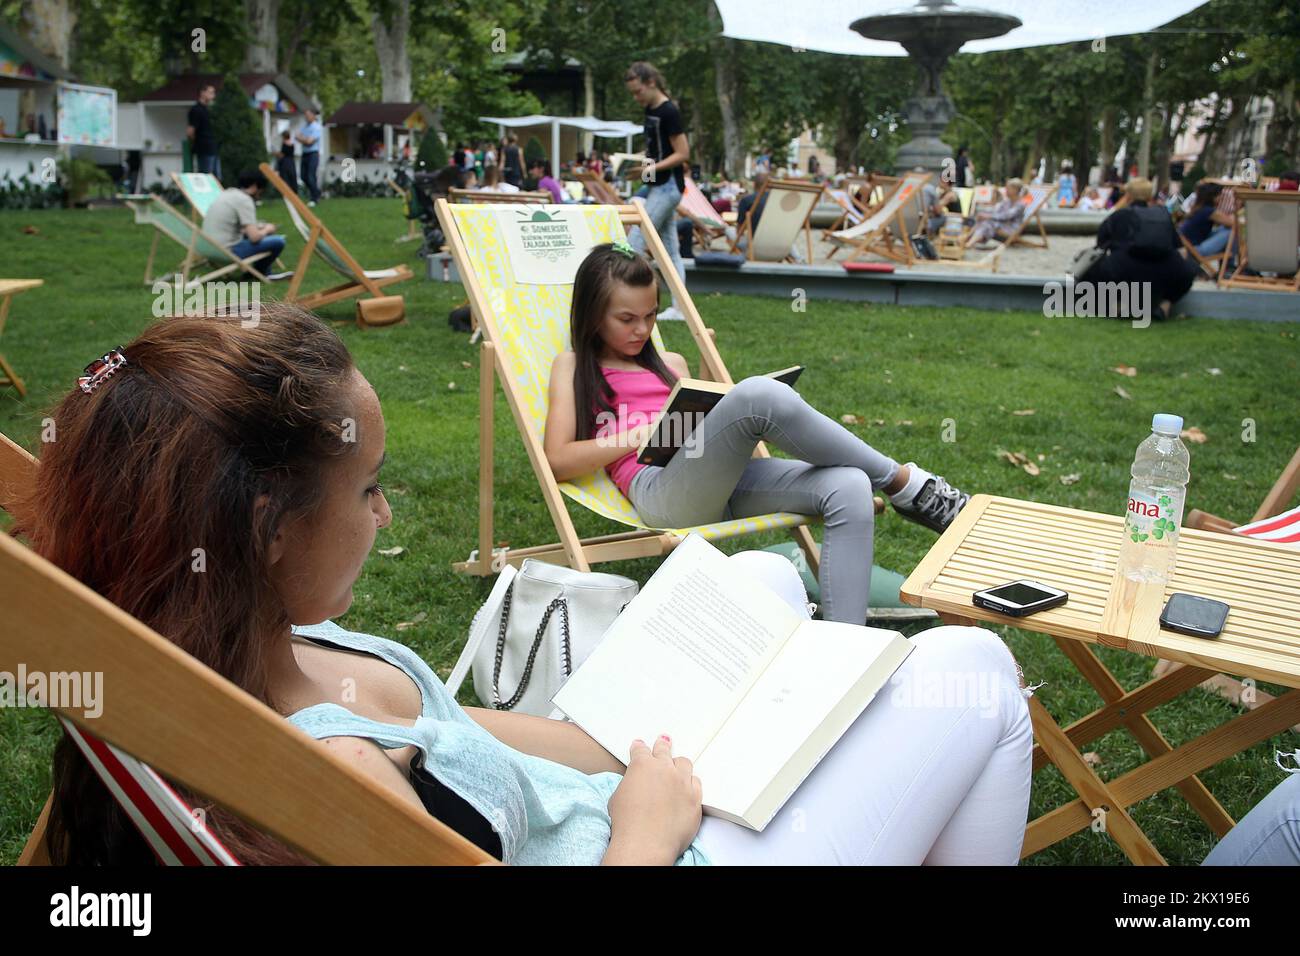 03.07.2017., Zagreb, Croatia - For the third year in a row, Lumen publishing house is organising a book fair that turns Zagreb's Zrinjevac Park into an oasis for bookworms and future booklovers. The park is covered with sand, there is parasols and deck chairs so that the visitors can read more than 200 free books in the shade, as well as purchase some of them at a discounted price. Visitors can cool down with one of the cocktails, inspired by book titles you can find at Lumen's beach. Photo: Goran Stanzl/PIXSELL Stock Photo